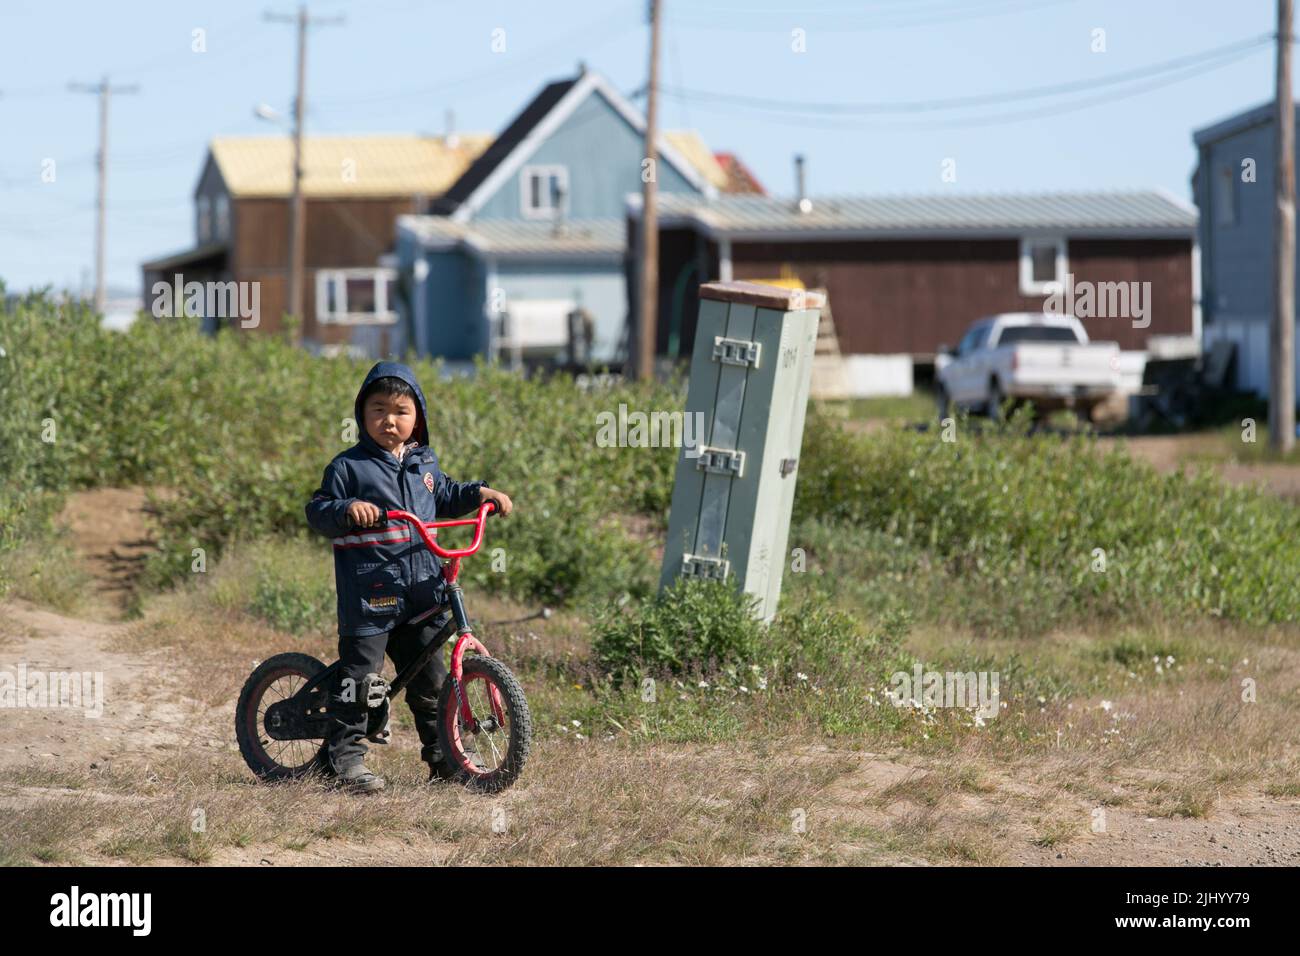 Young boy on bicycle in summer in the Inuvialuit community of Tuktoyaktuk, western Arctic, Northwest Territories, Canada. Stock Photo